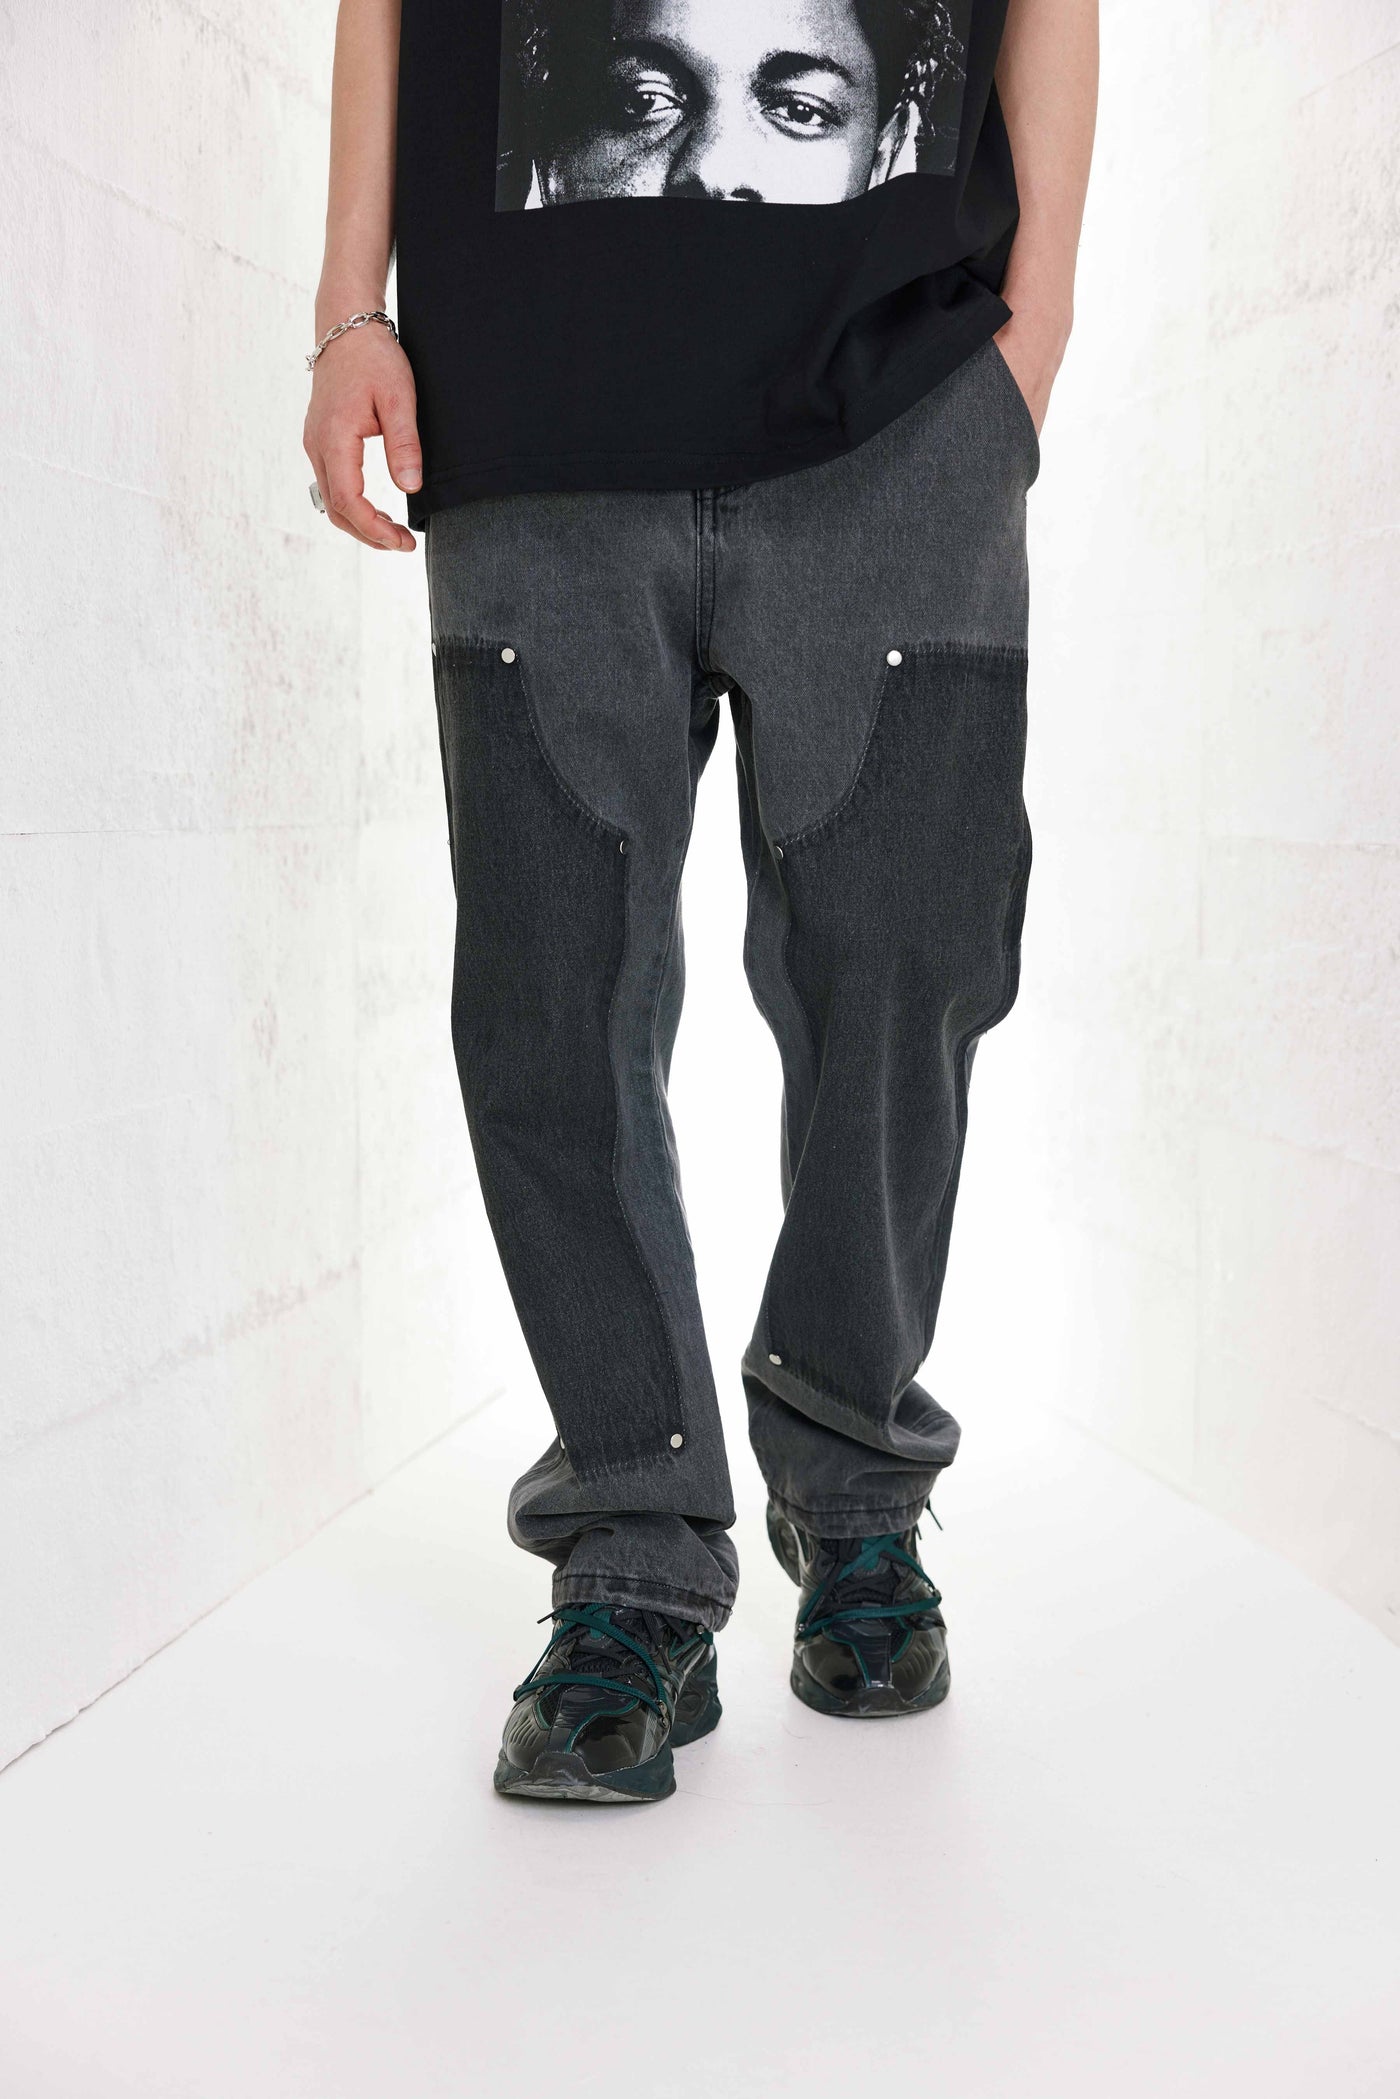 CLASSIC CHARCOAL PATCHWORK VALKYRE JEANS